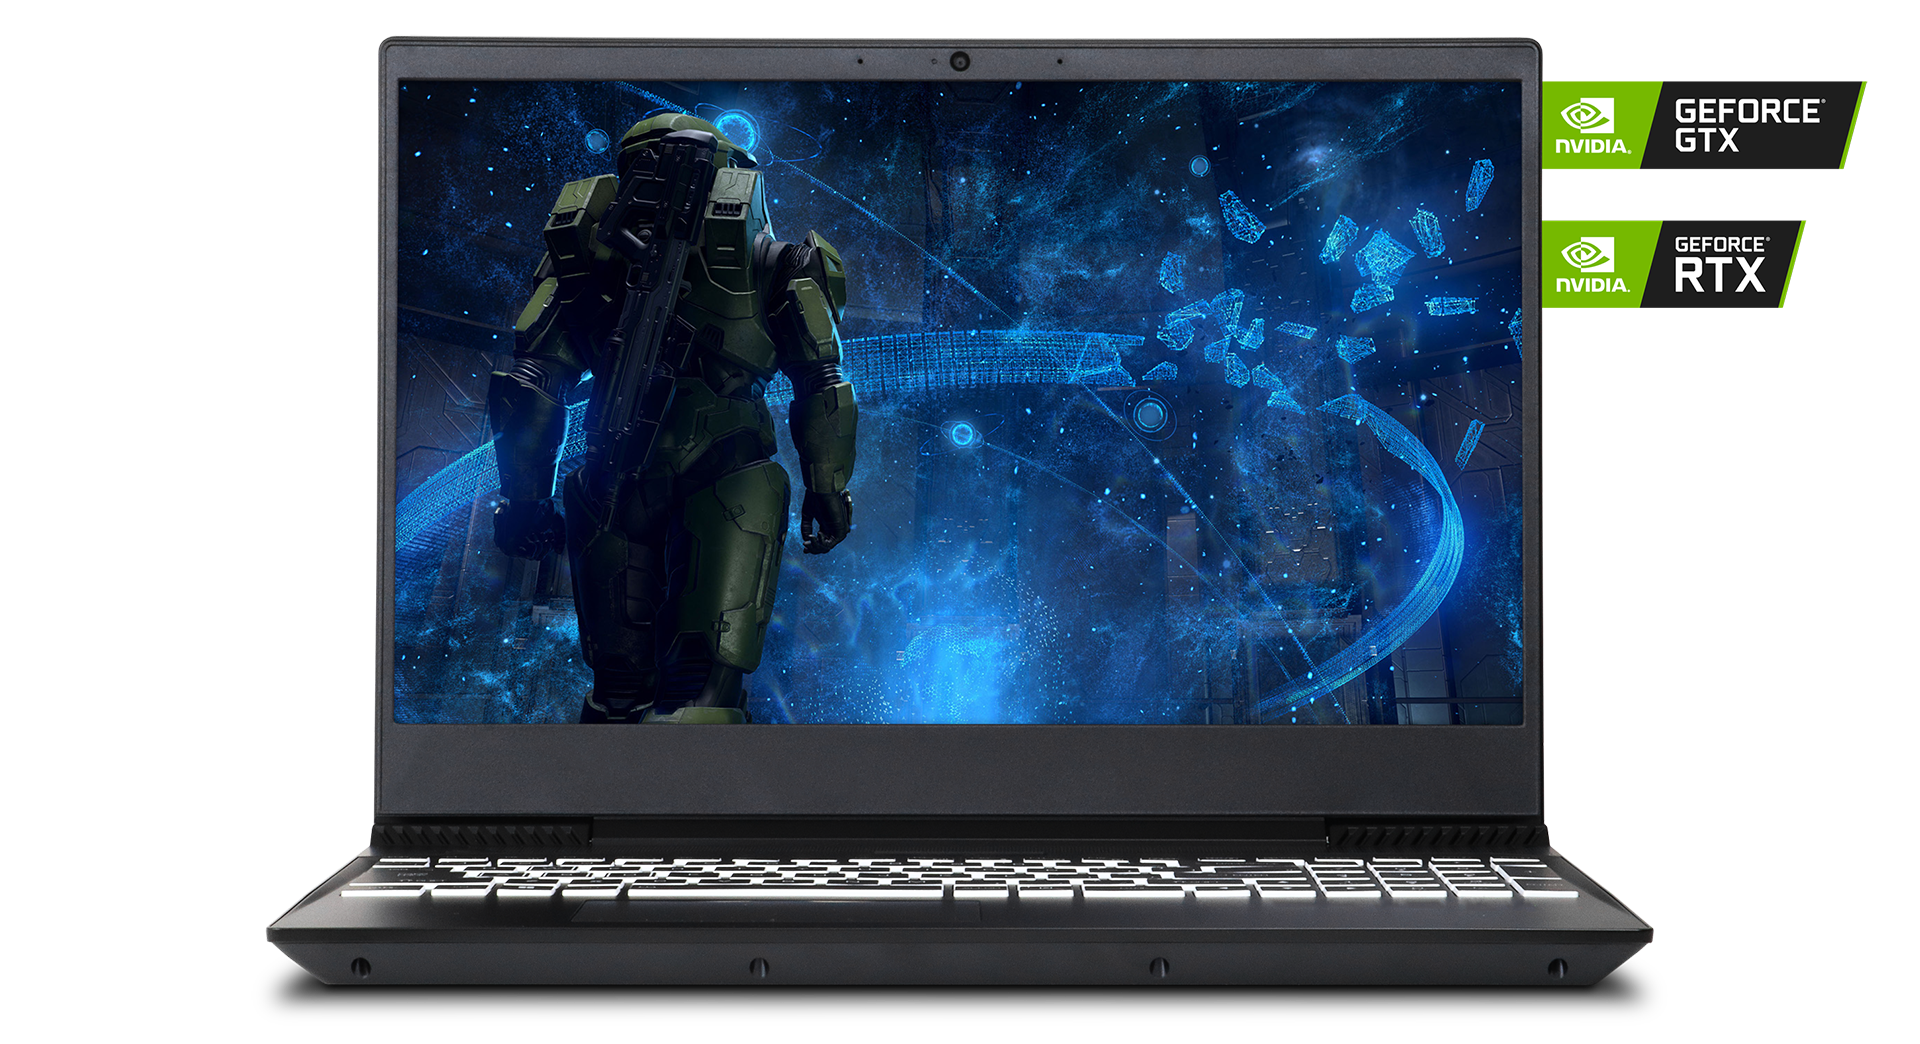 Horizon Skyline Laptop viewed from the front with NVIDIA GeForce Logos